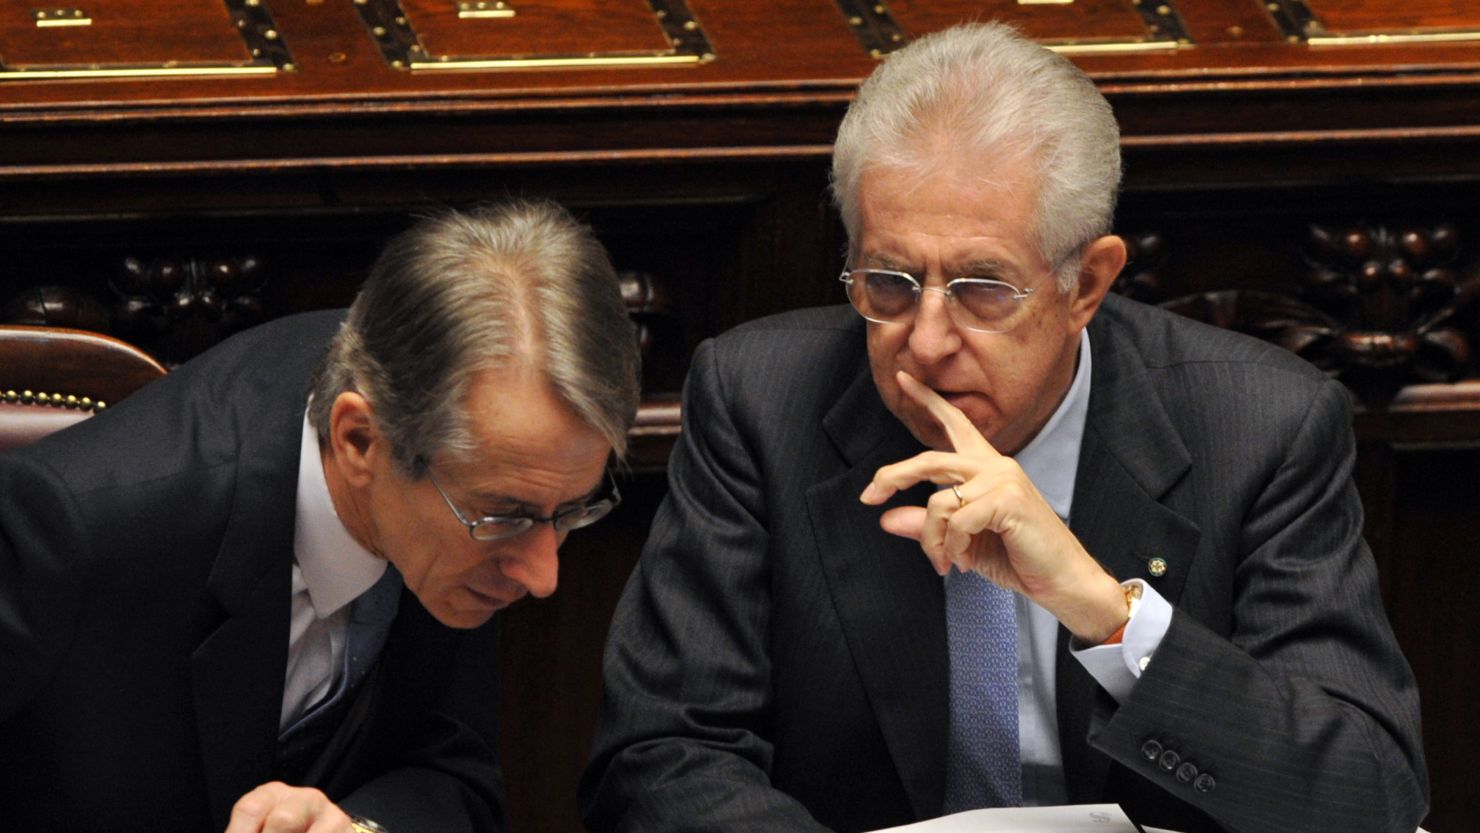 Italian prime minister Mario Monti speaks with his foreign minister before a vote of confidence in Italy's lower house of Parliament.